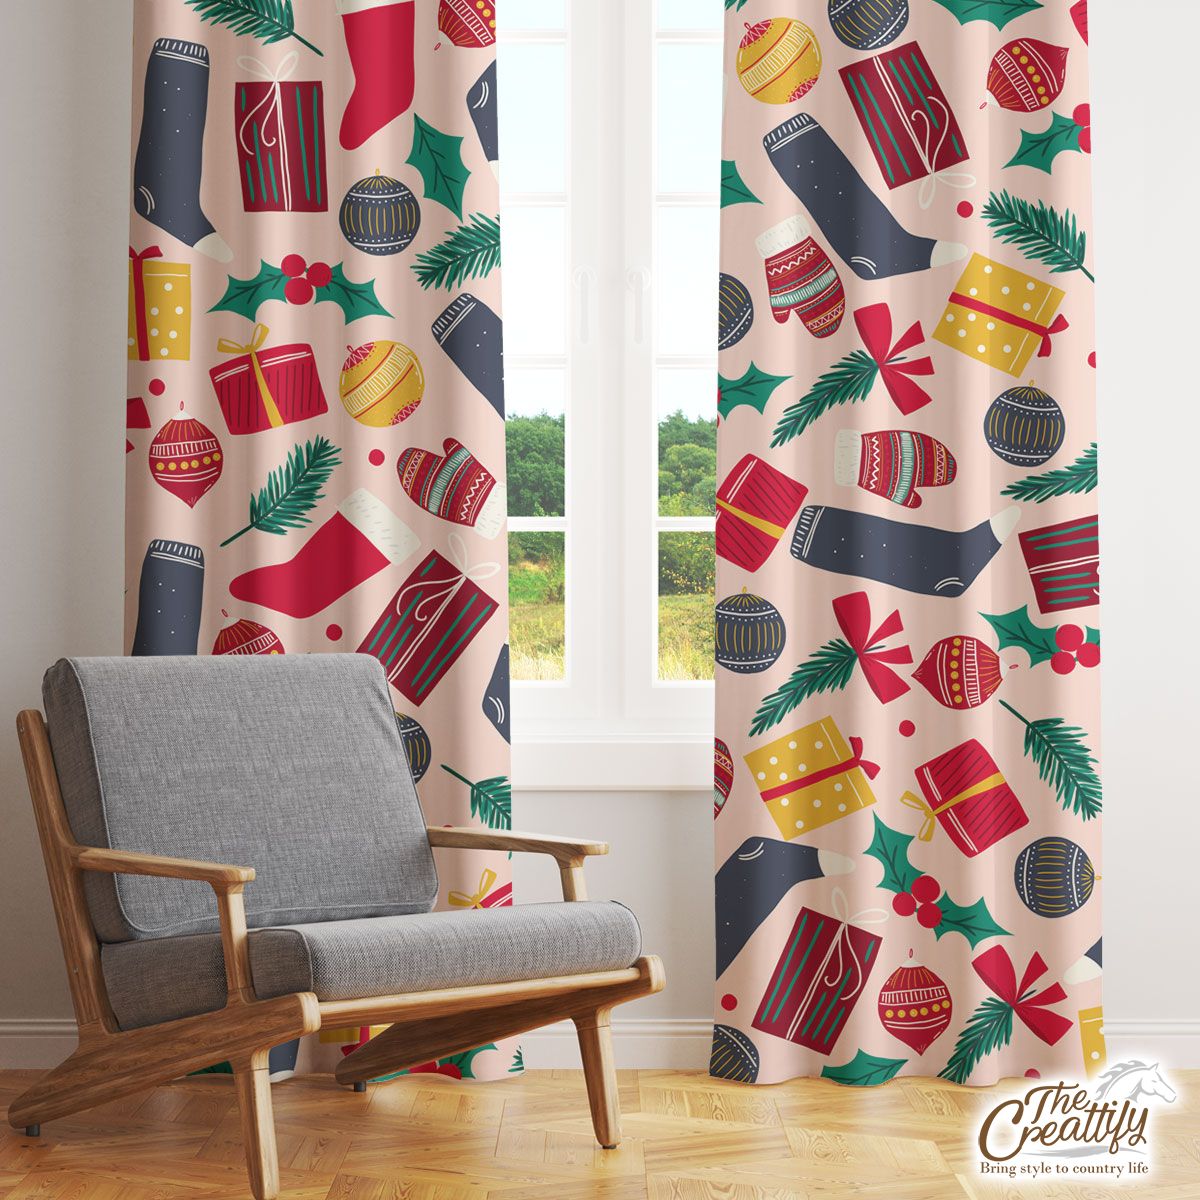 Happy Christmas With Full Of Red Socks, Christmas Balls, Gifts, Holly Left And Wool Gloves Pattern Window Curtain